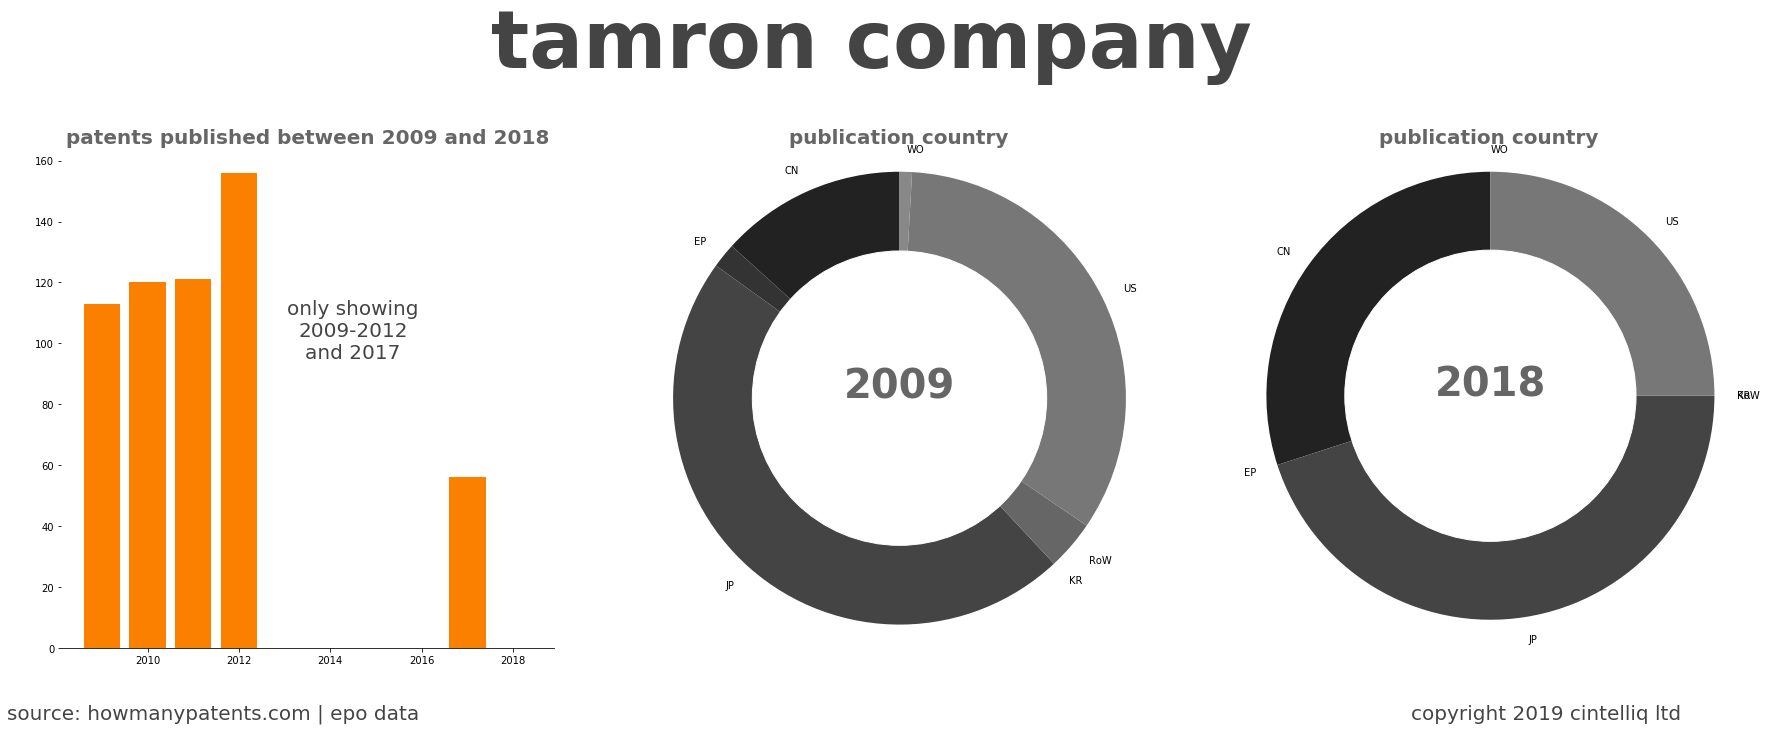 summary of patents for Tamron Company